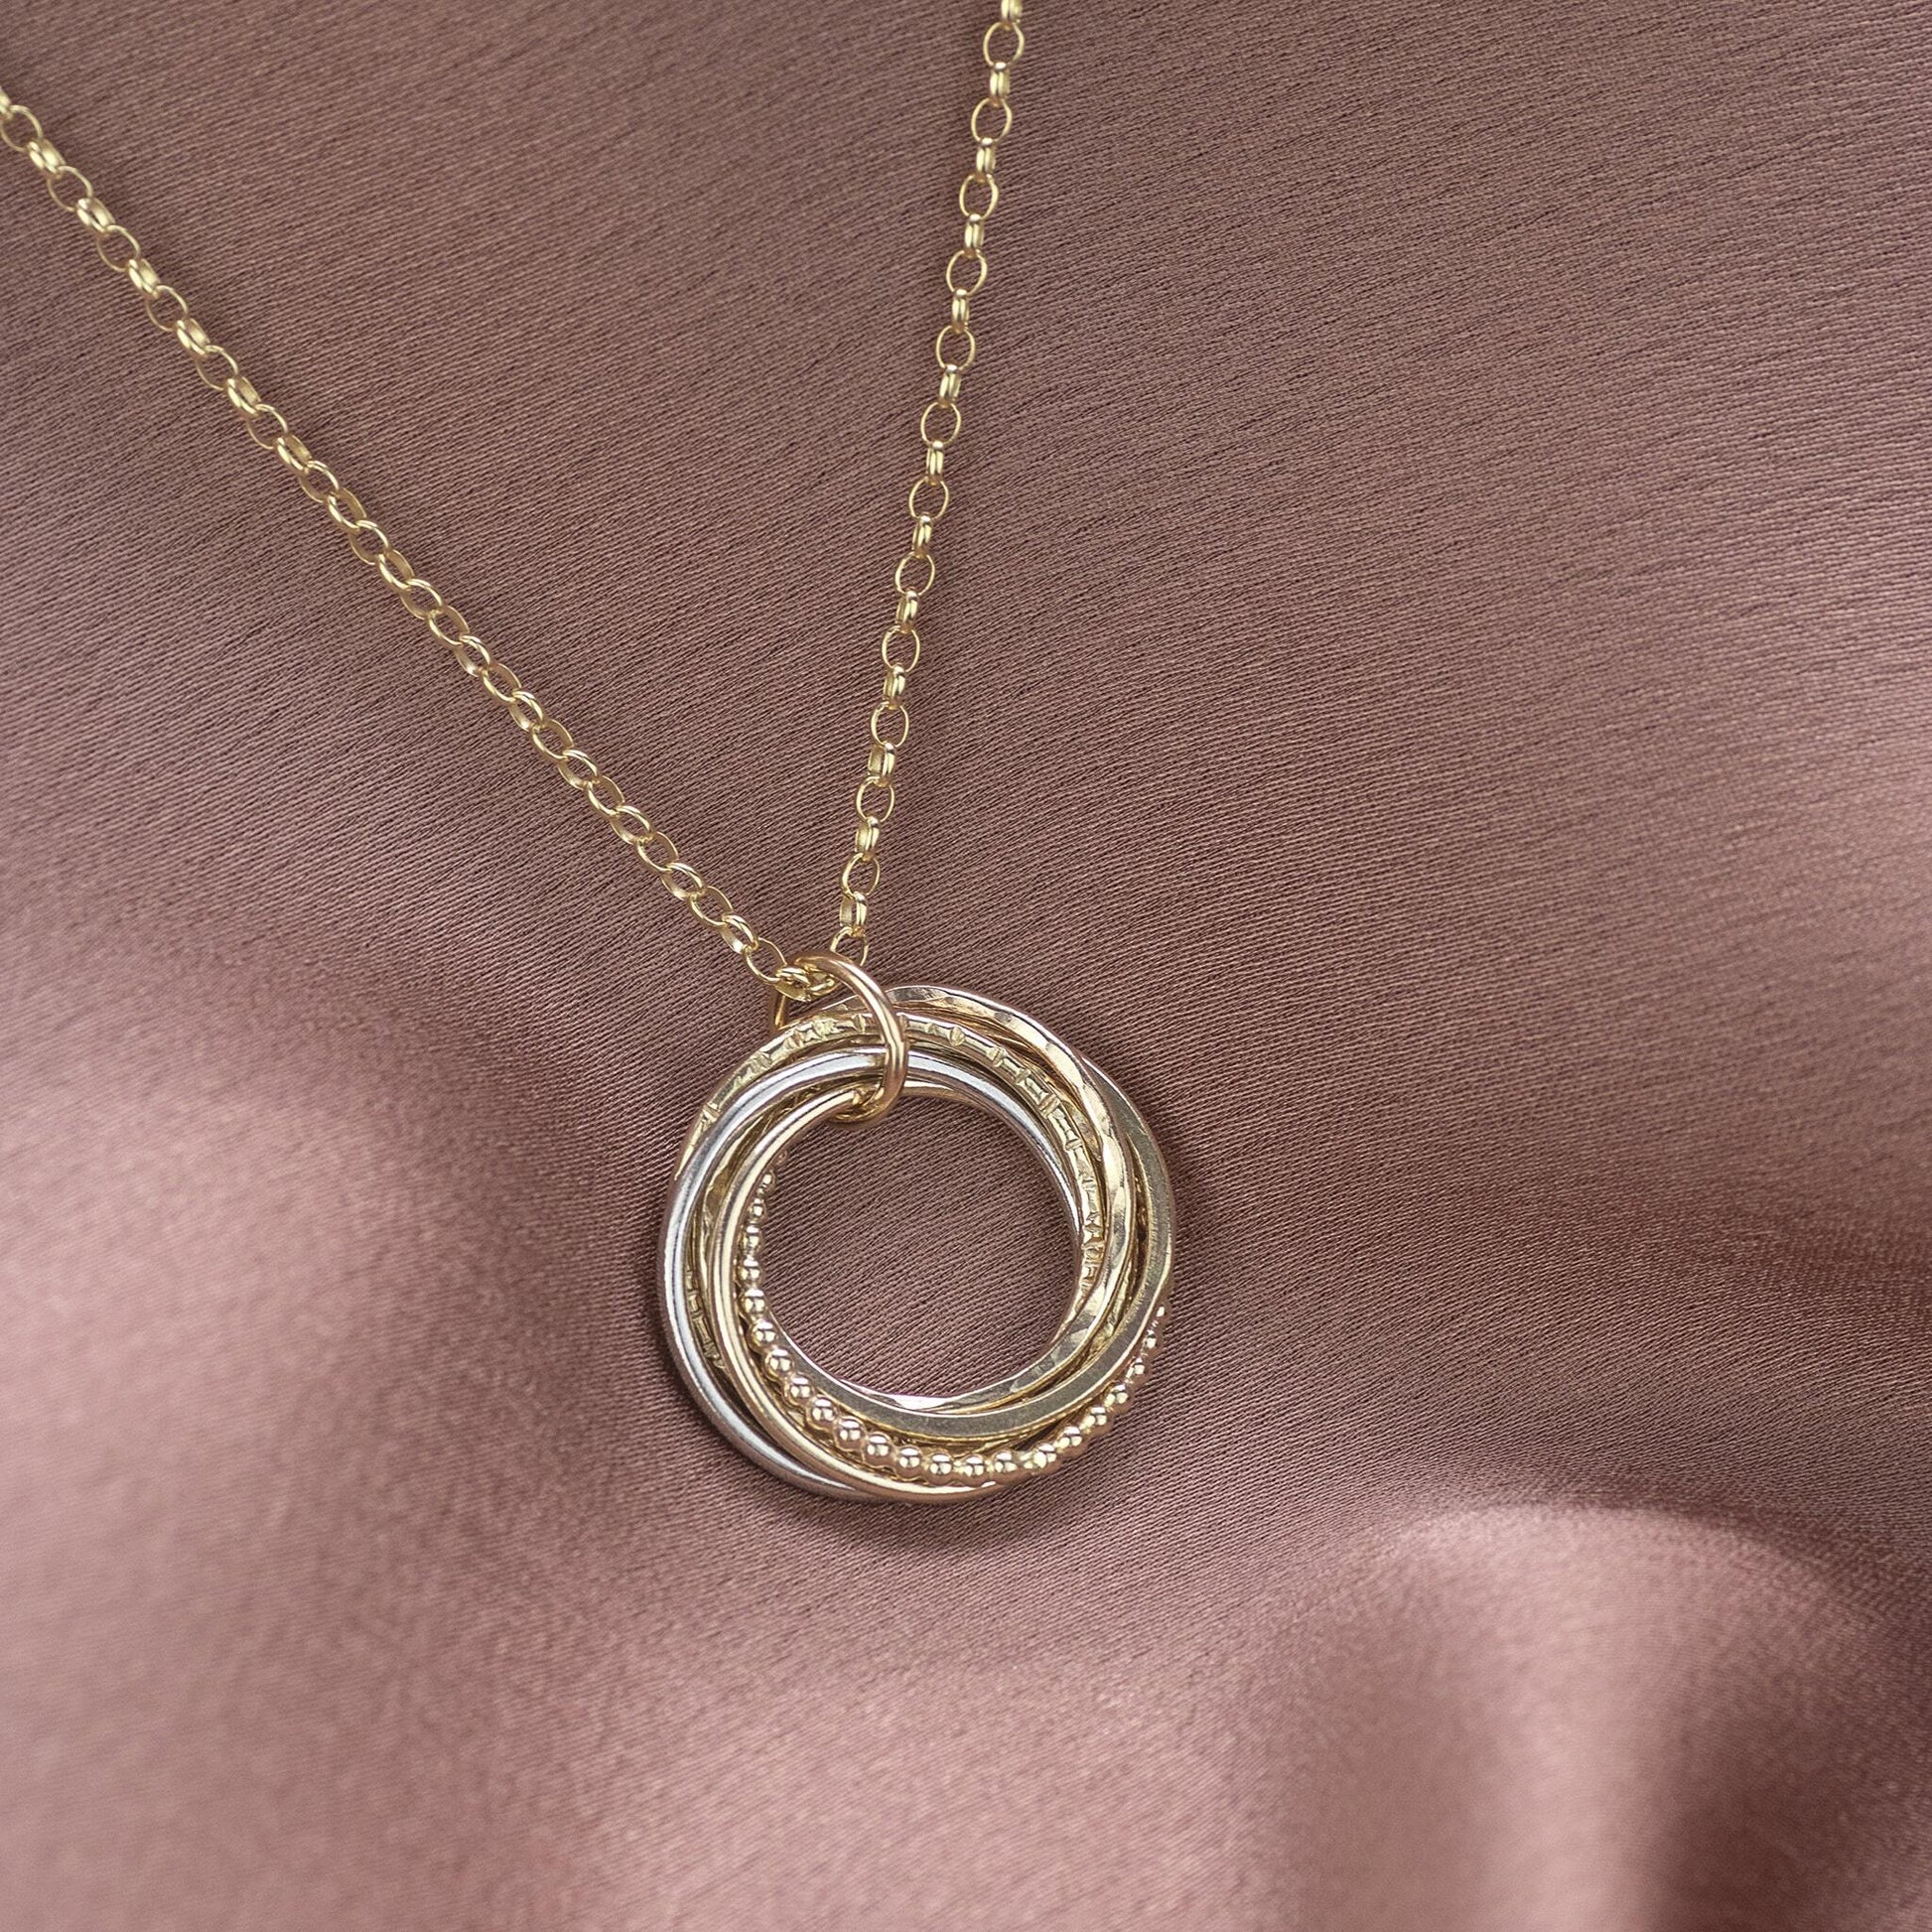 9kt Gold 70th Birthday Necklace - The Original 7 Links for 7 Decades Necklace - Recycled Gold & Platinum